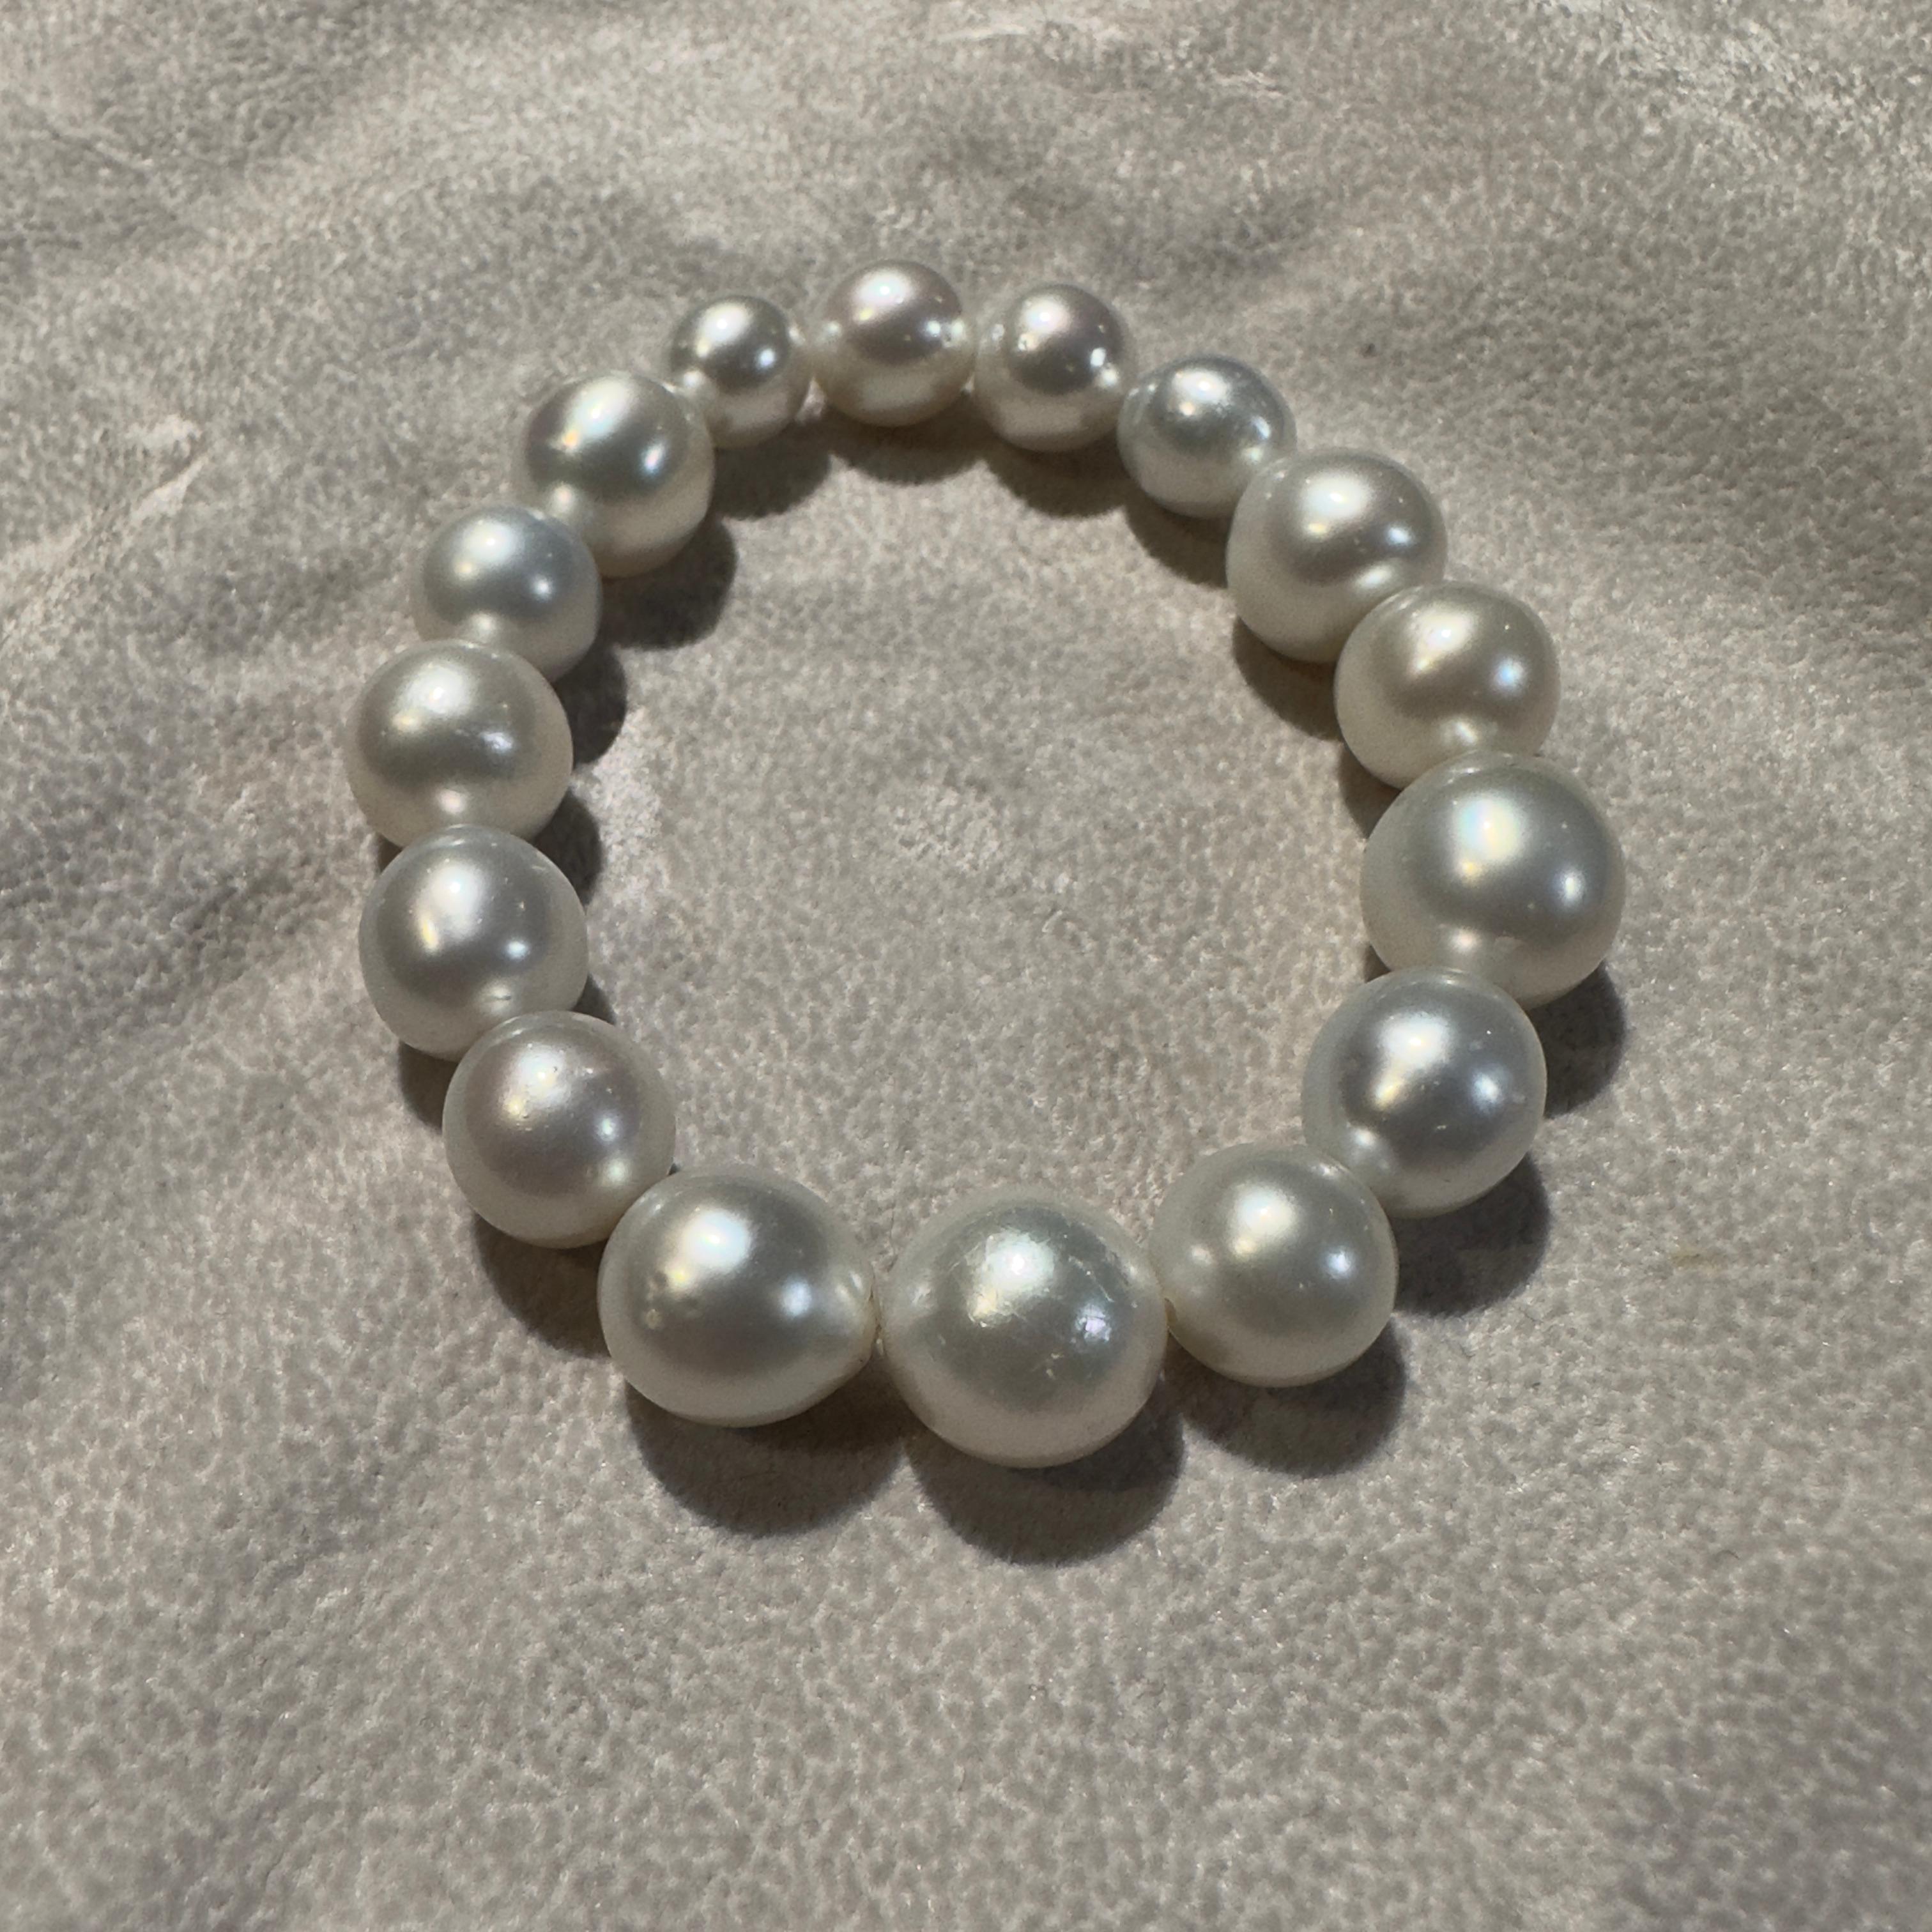 A white Australian South Sea Pearl Bracelet 

It consists of 16 cultured south sea pearls in white Colour with pink overtone. The Pearls are of High Lustre with very few natural surface pitting.

the size ranging from 10mm-14mm

